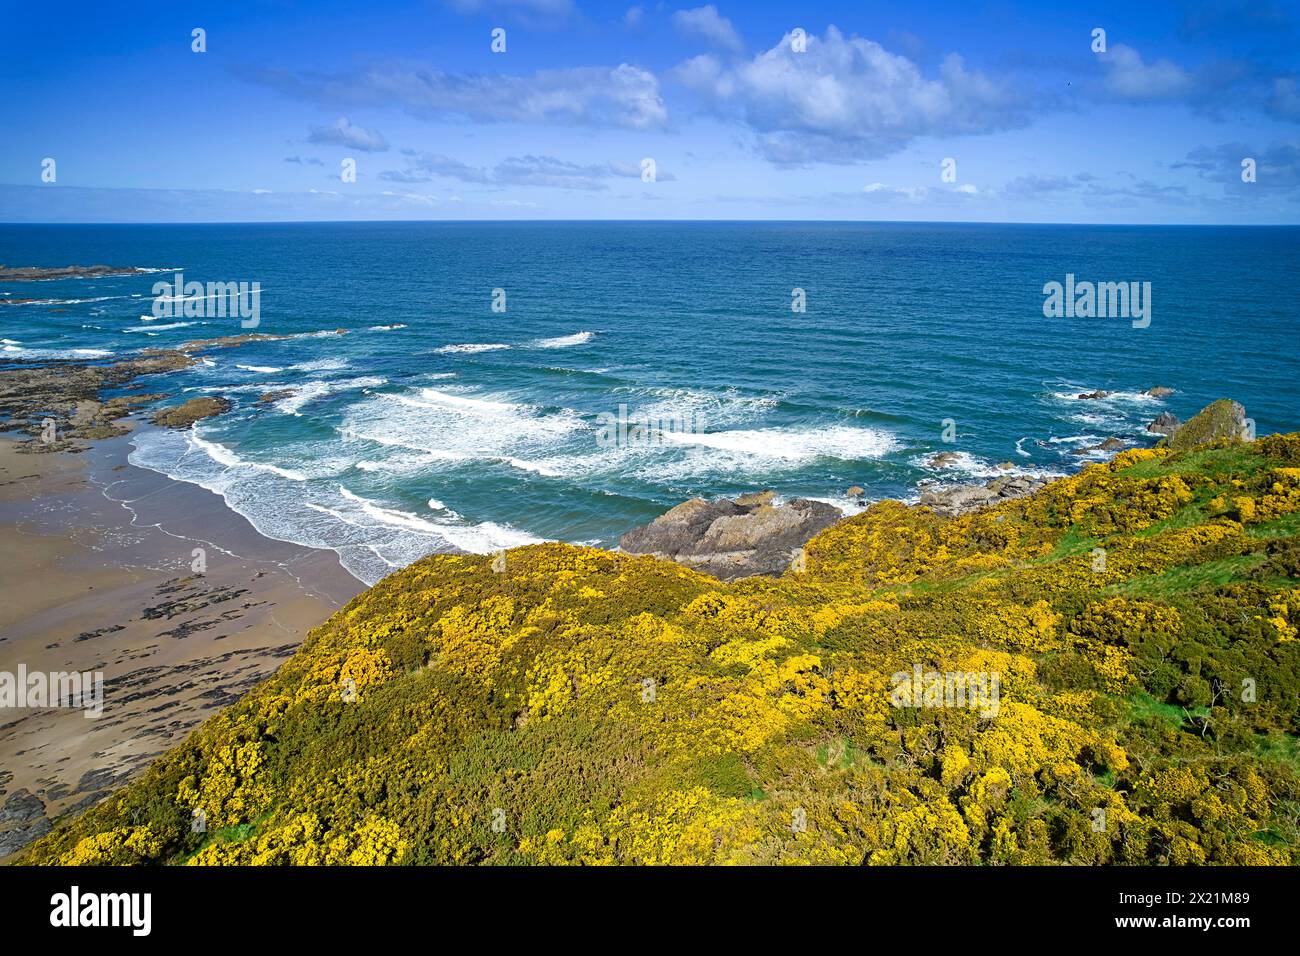 Sunnyside Beach and Bay Cullen Aberdeenshire Scotland blue sea and sky of the Moray Firth masses of yellow gorse in Springtime Stock Photo